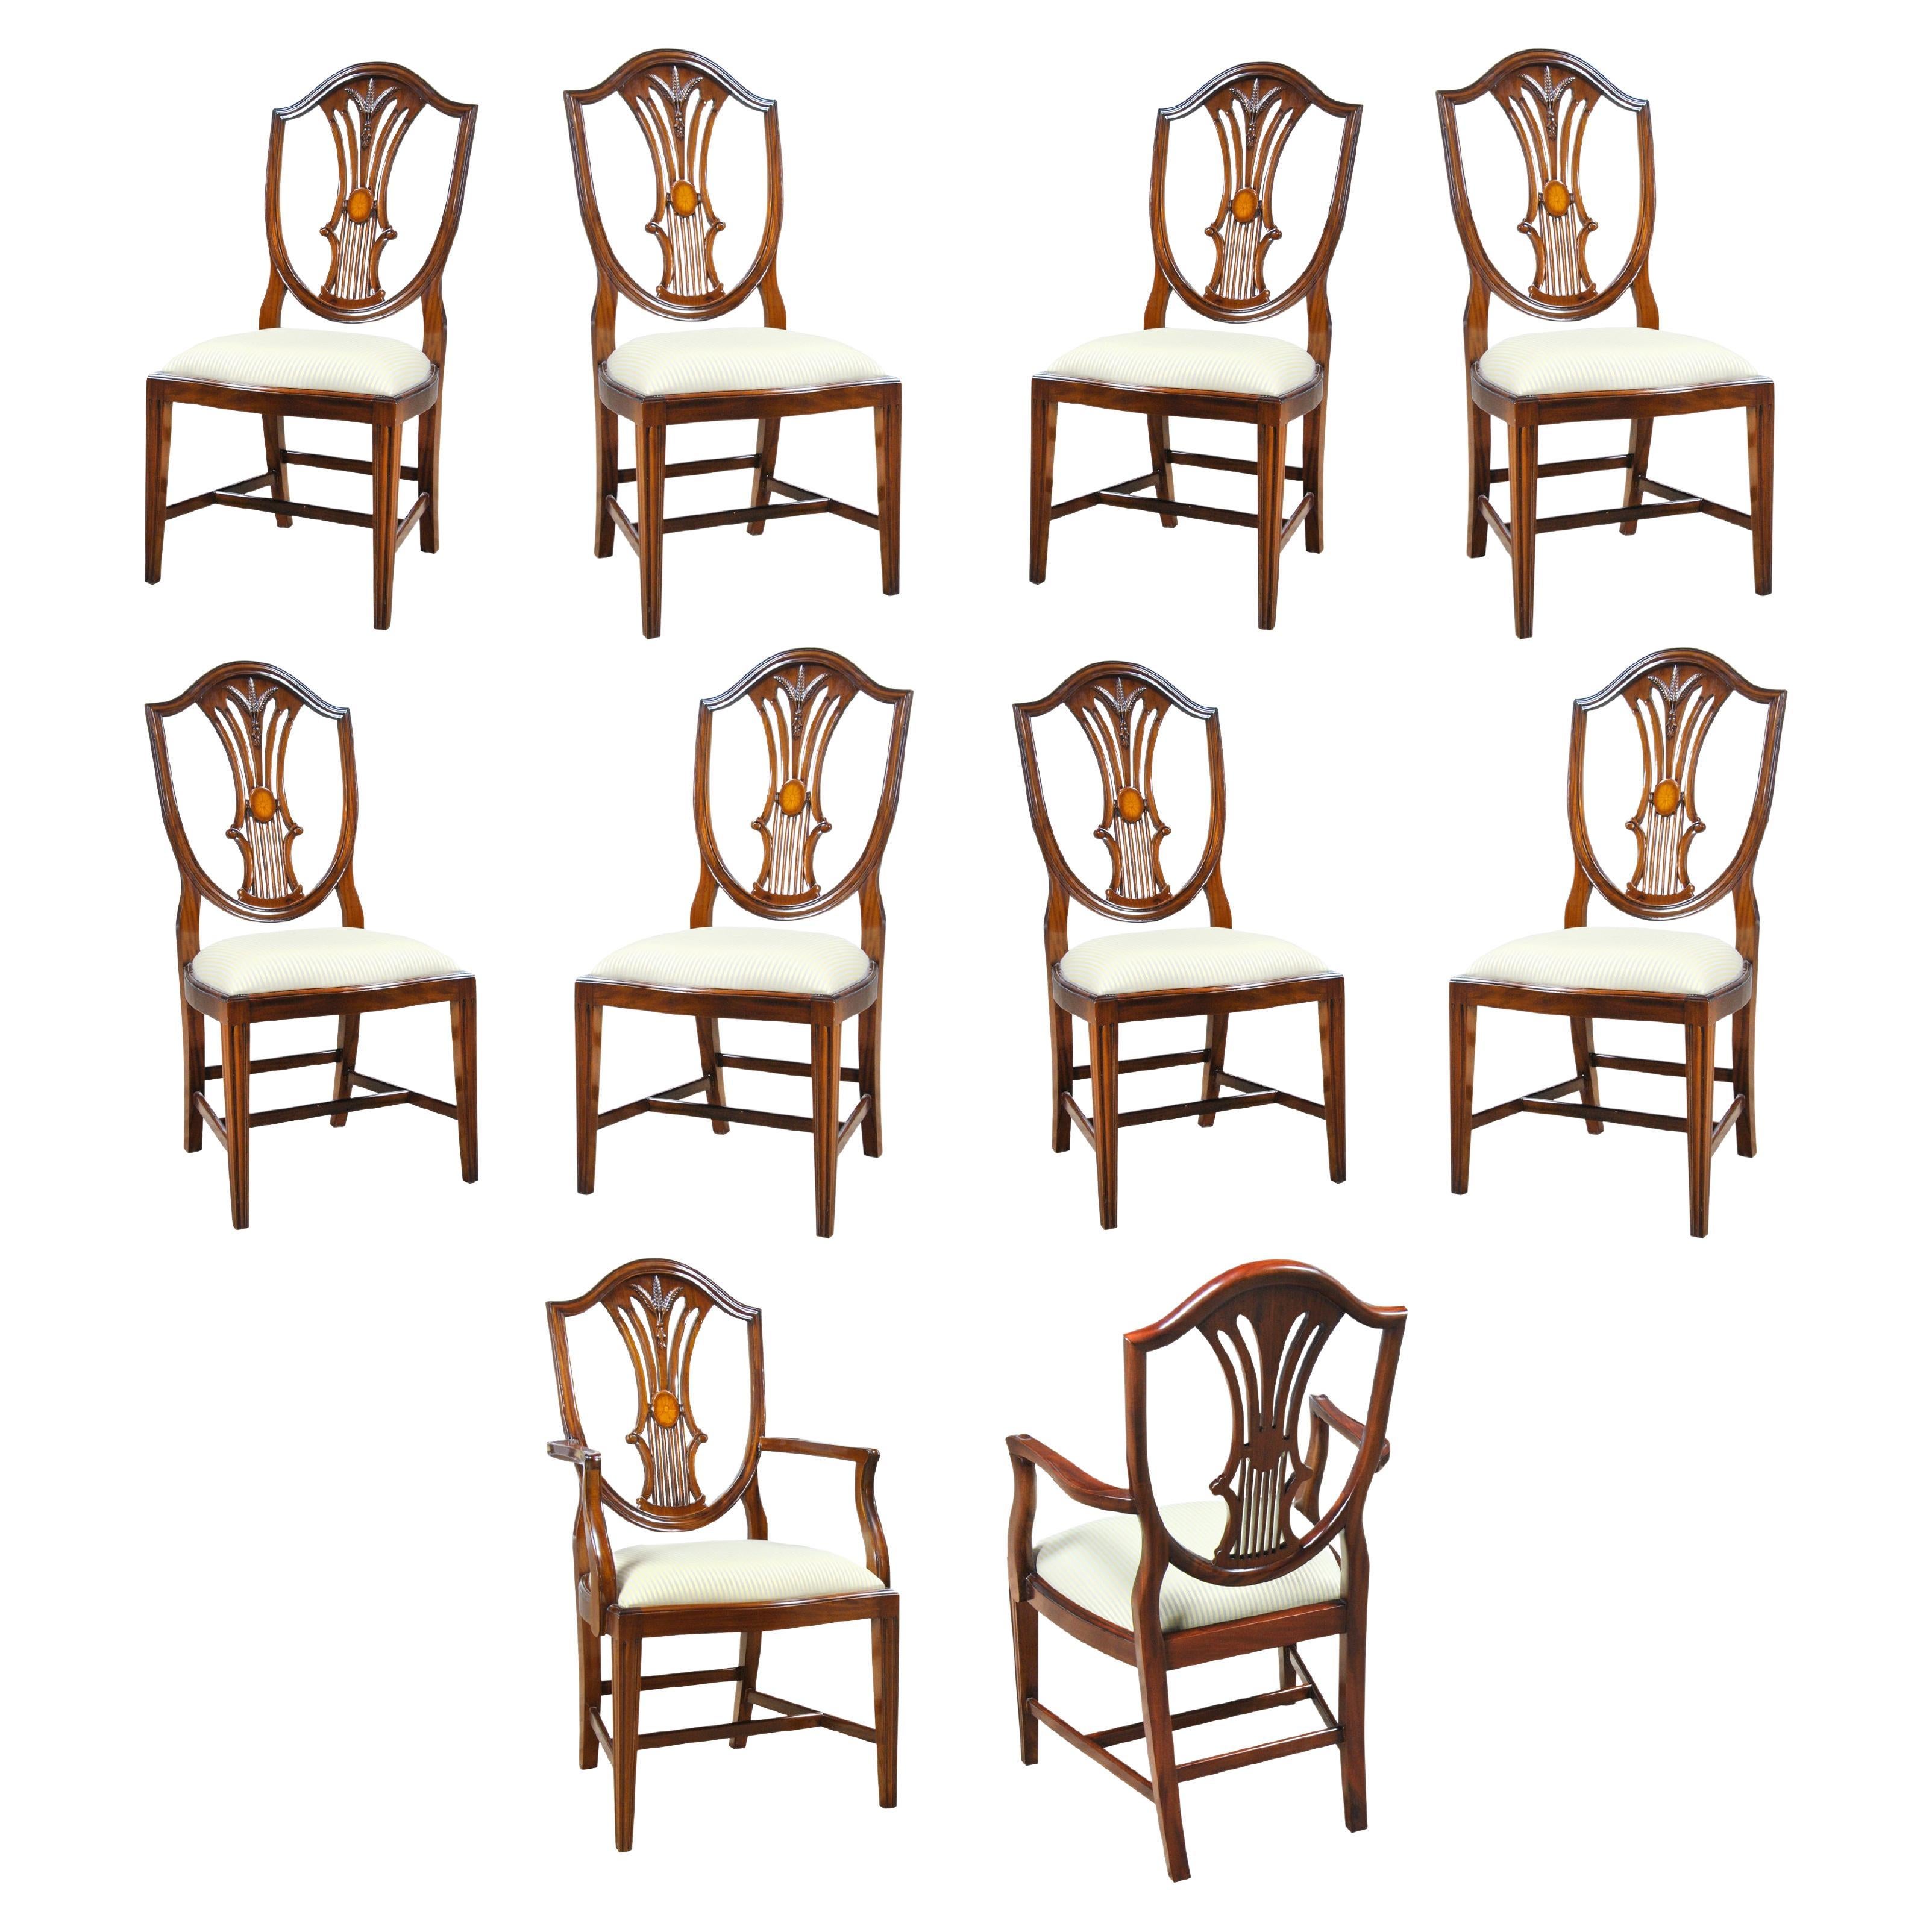 Inlaid Shield Back Chairs, Set of 10 For Sale